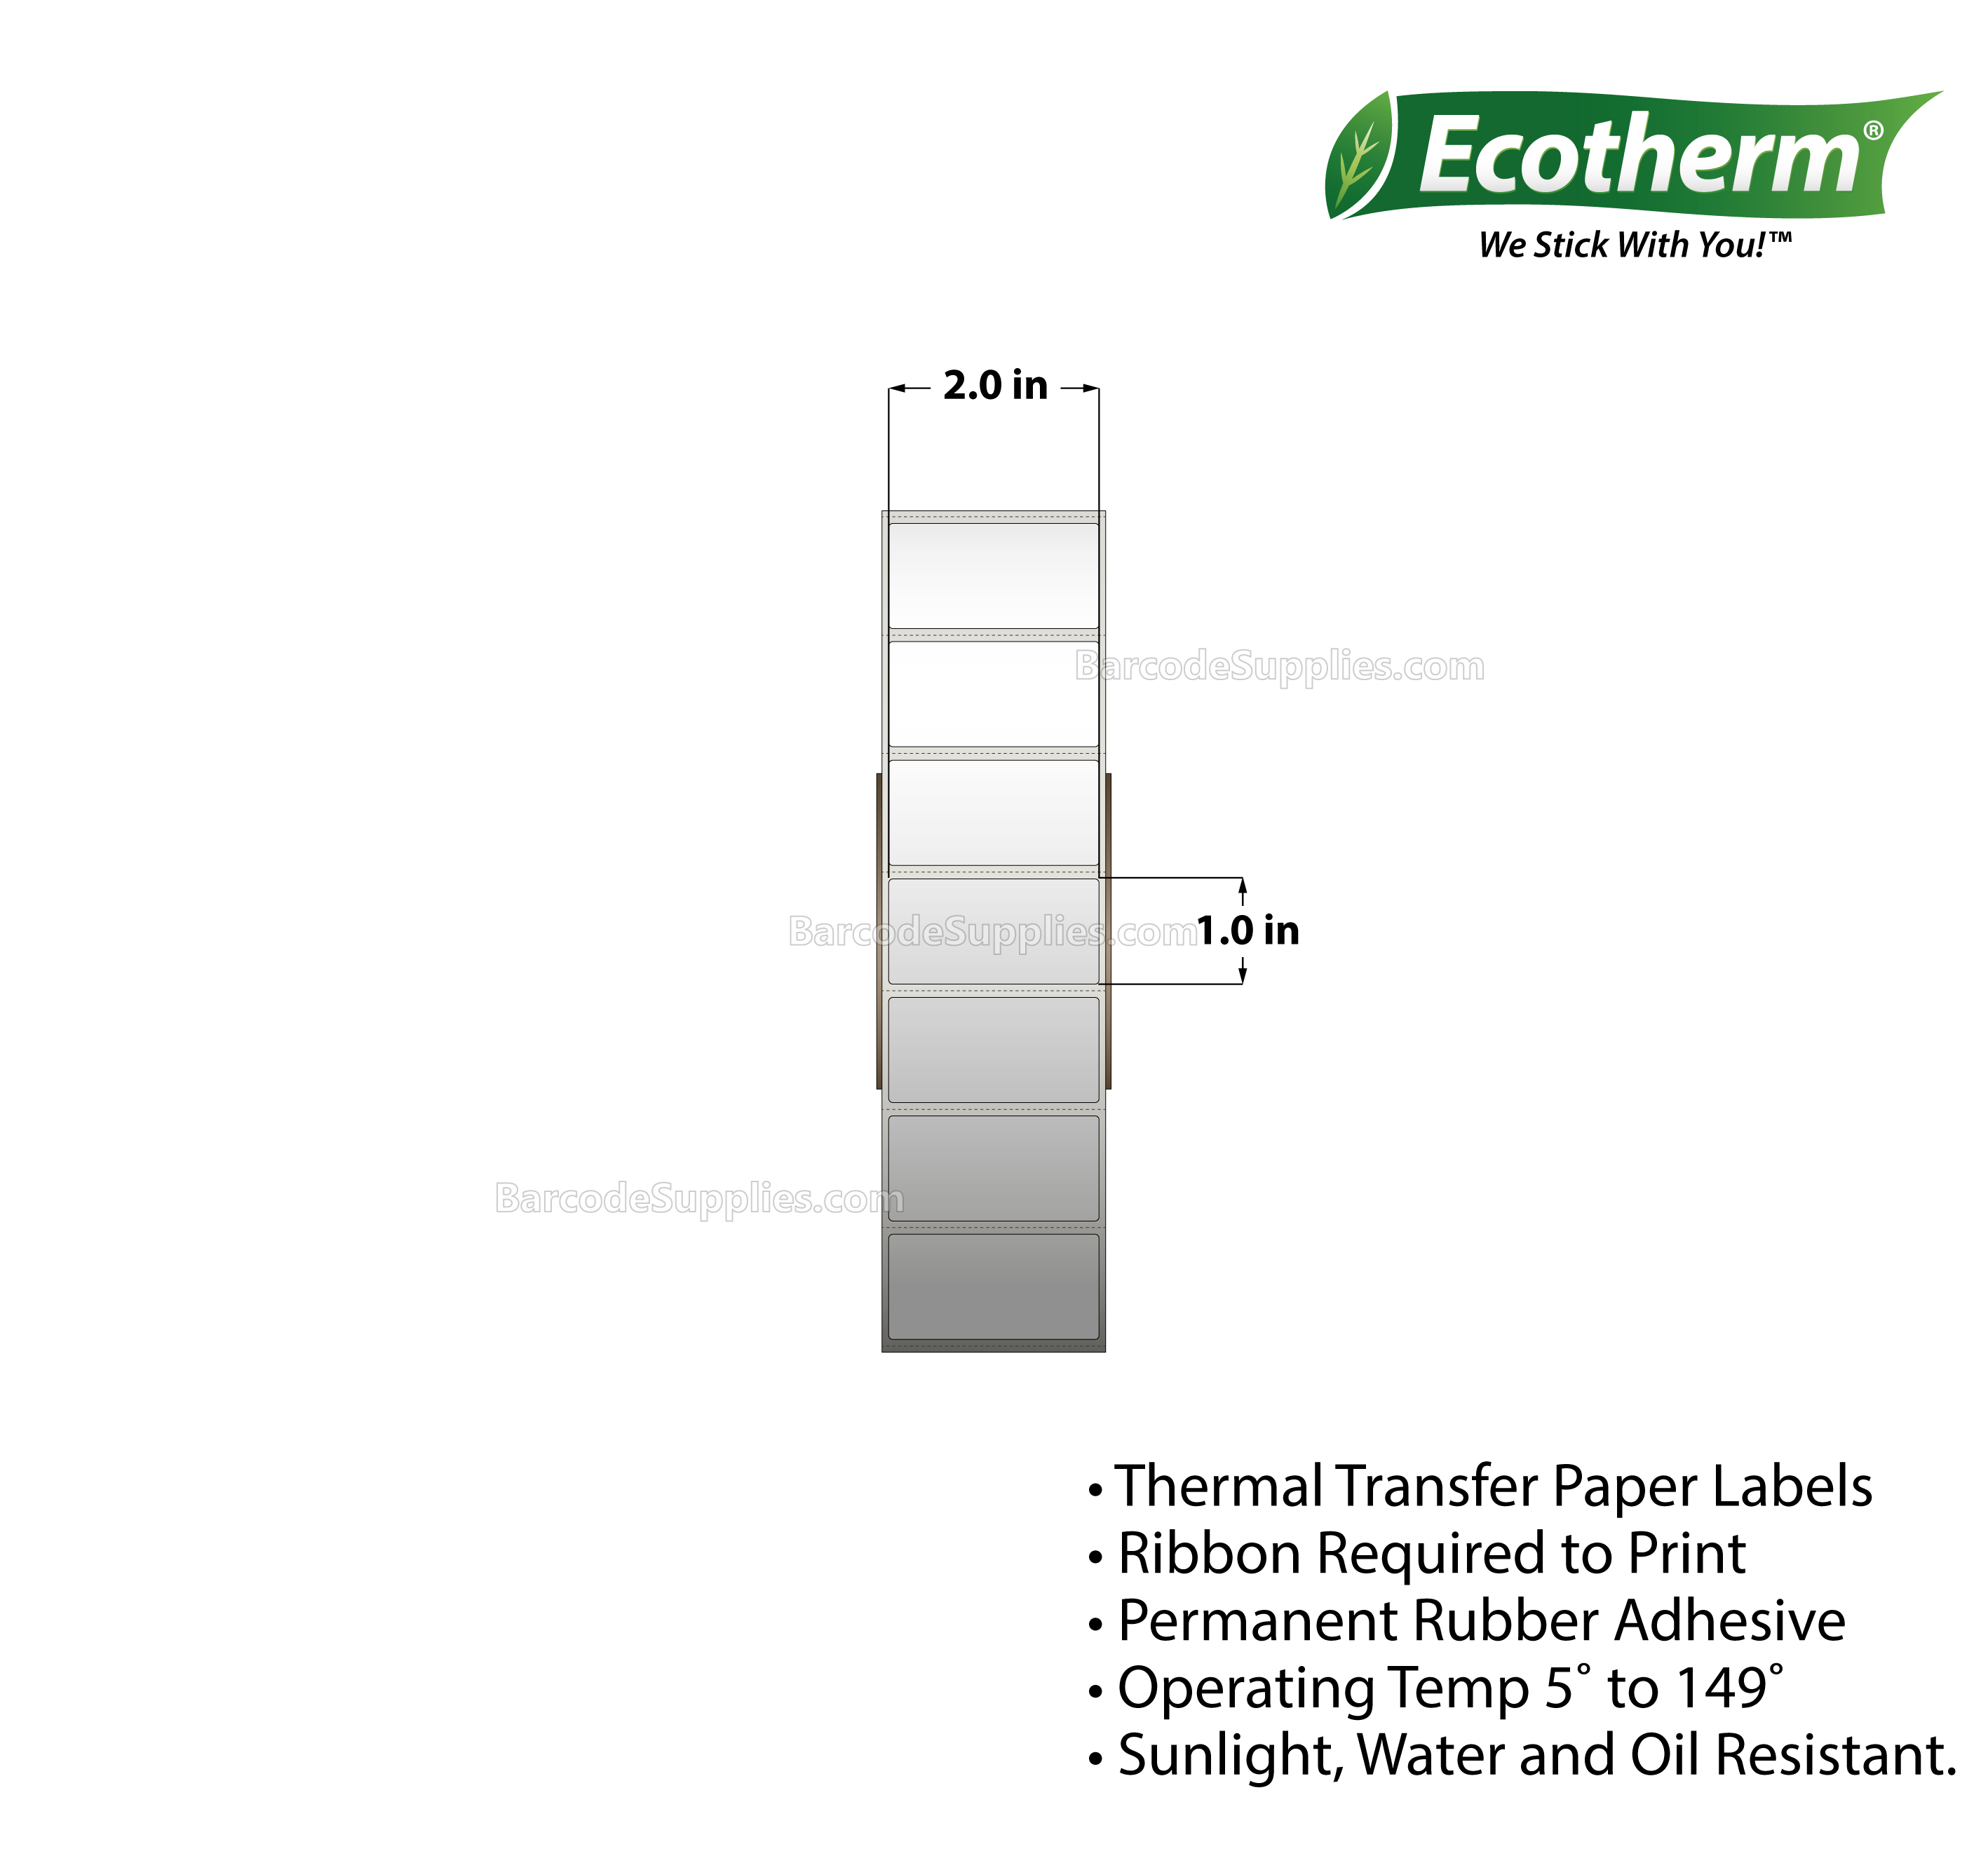 2 x 1 Thermal Transfer White Labels With Rubber Adhesive - Perforated - 11000 Labels Per Roll - Carton Of 4 Rolls - 44000 Labels Total - MPN: ECOTHERM28110-4